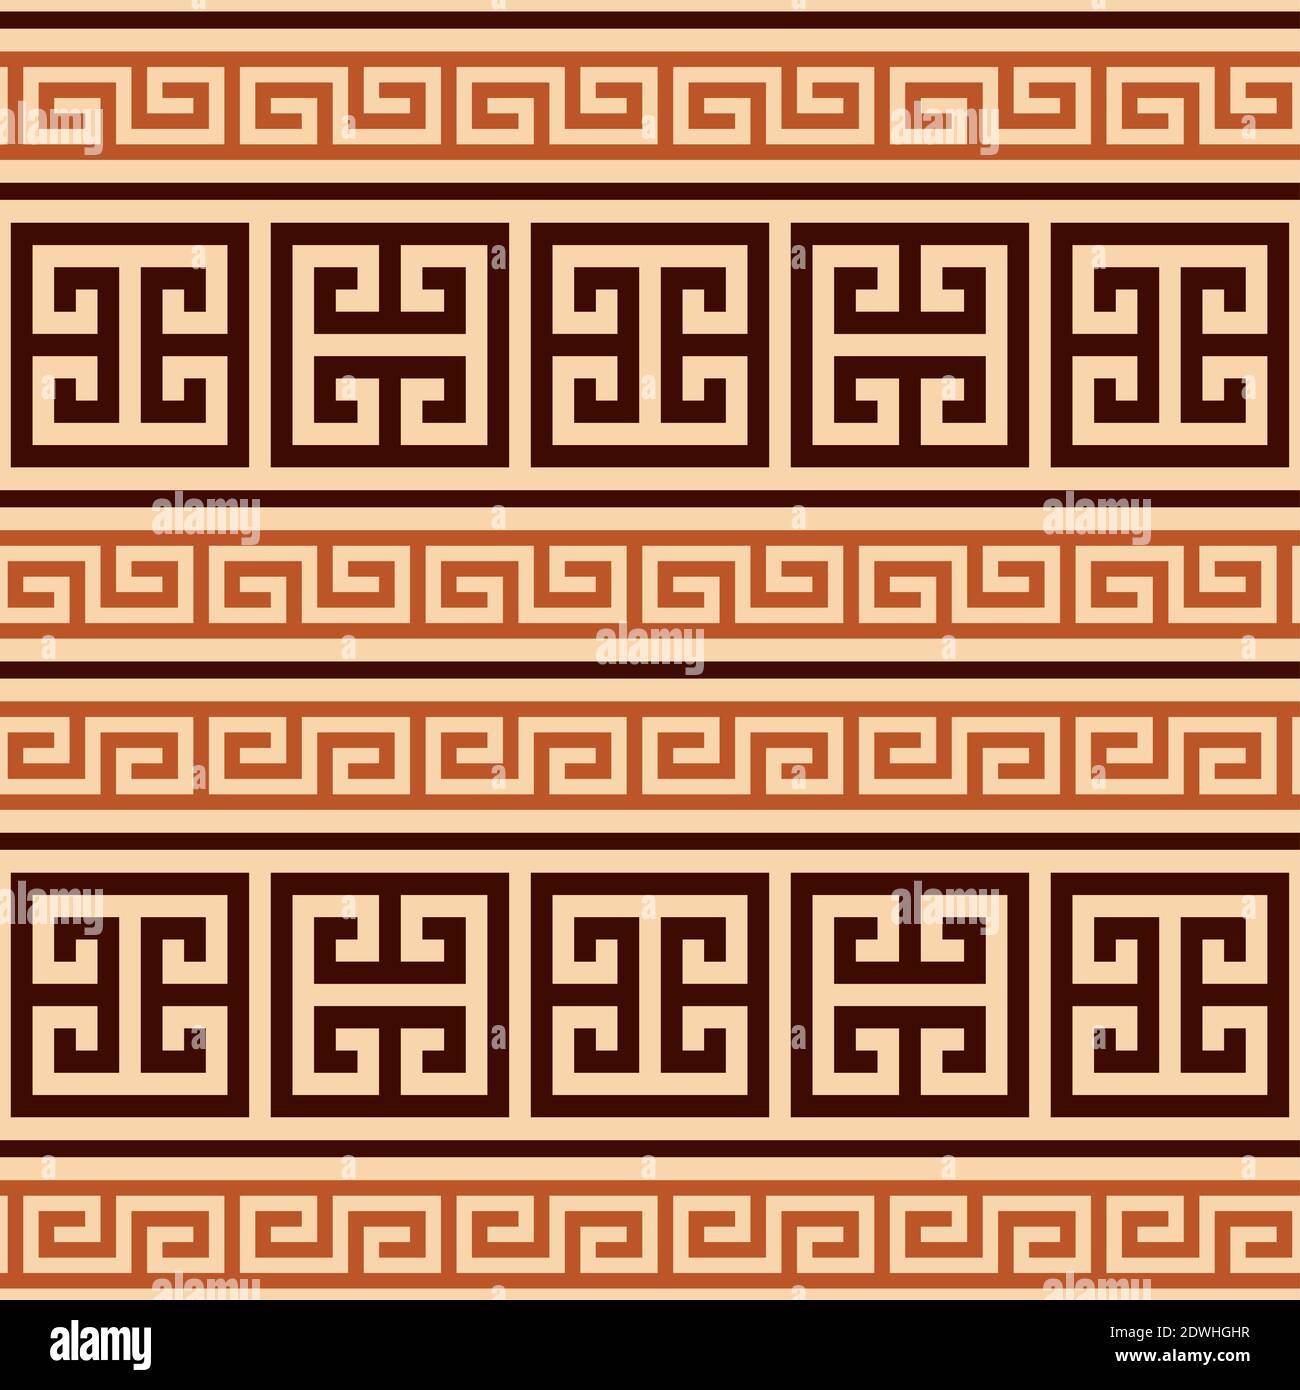 Greek key seamless vector geometric brown and yellow pattern inspired by ancient Greece pottery and ceramics art Stock Vector